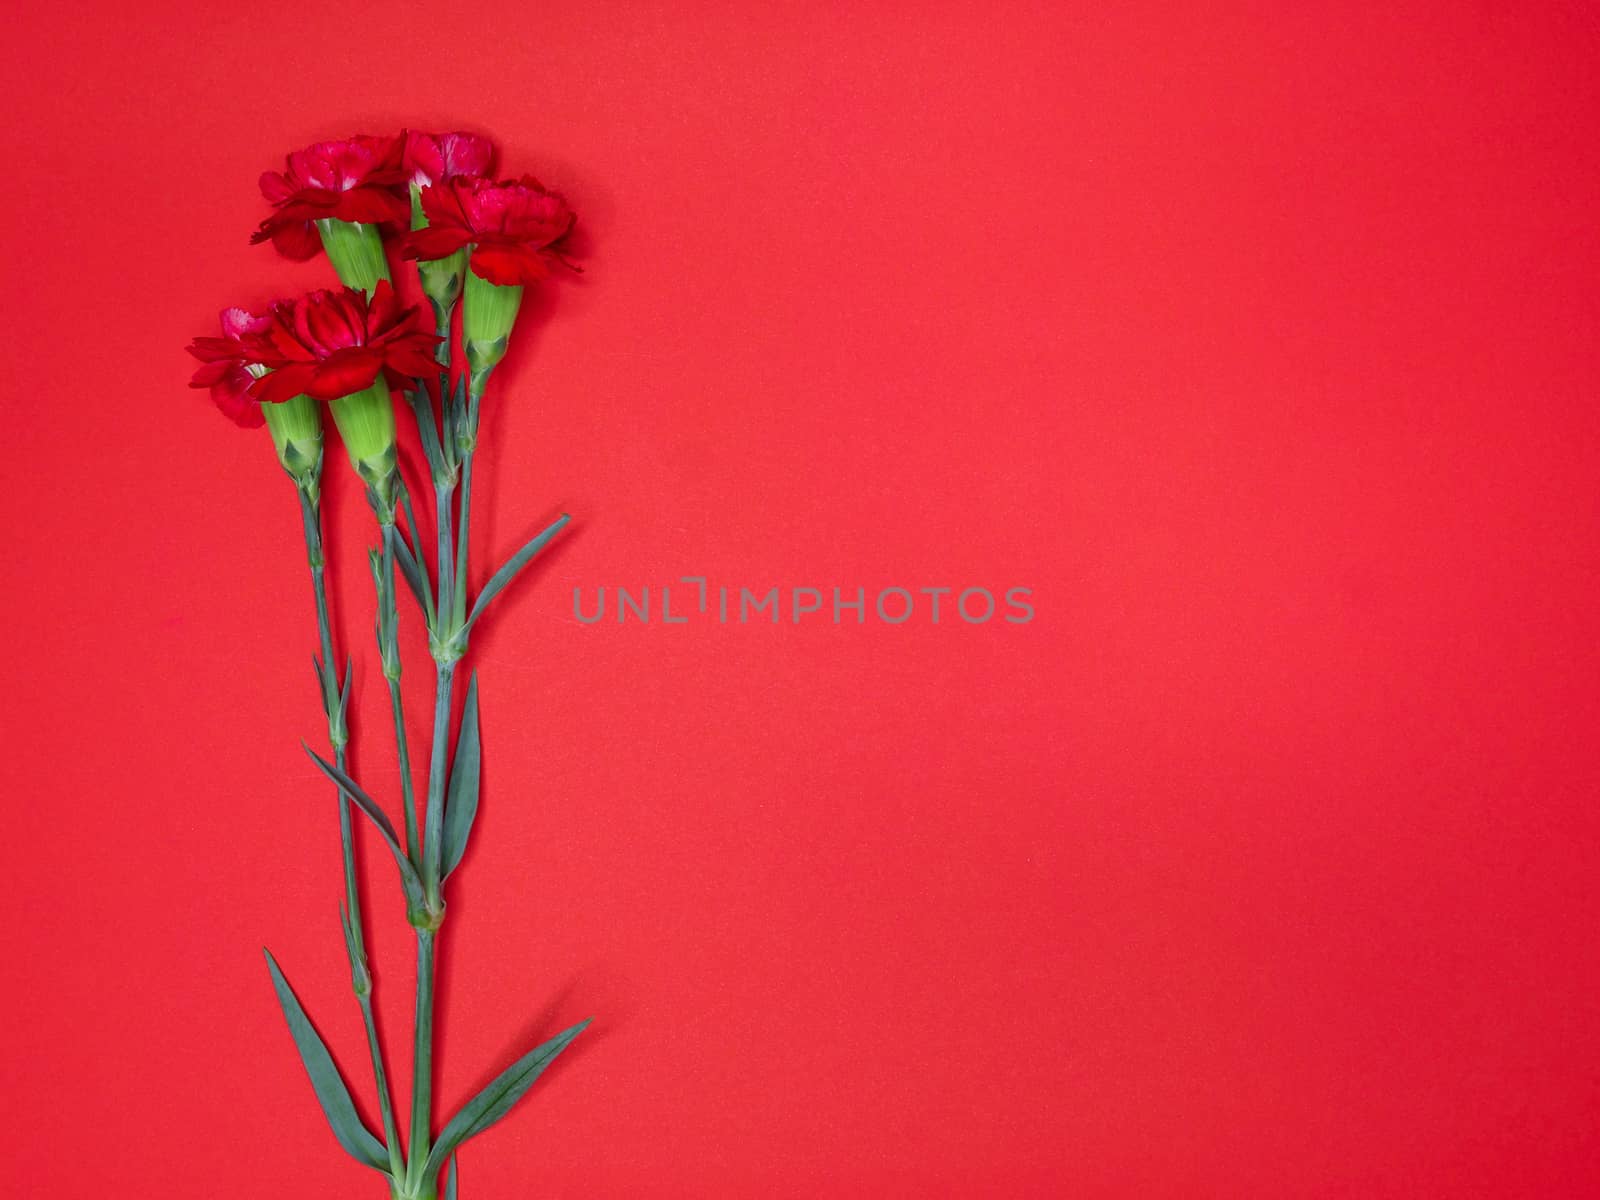 red carnations on a large red paper by Nawoot